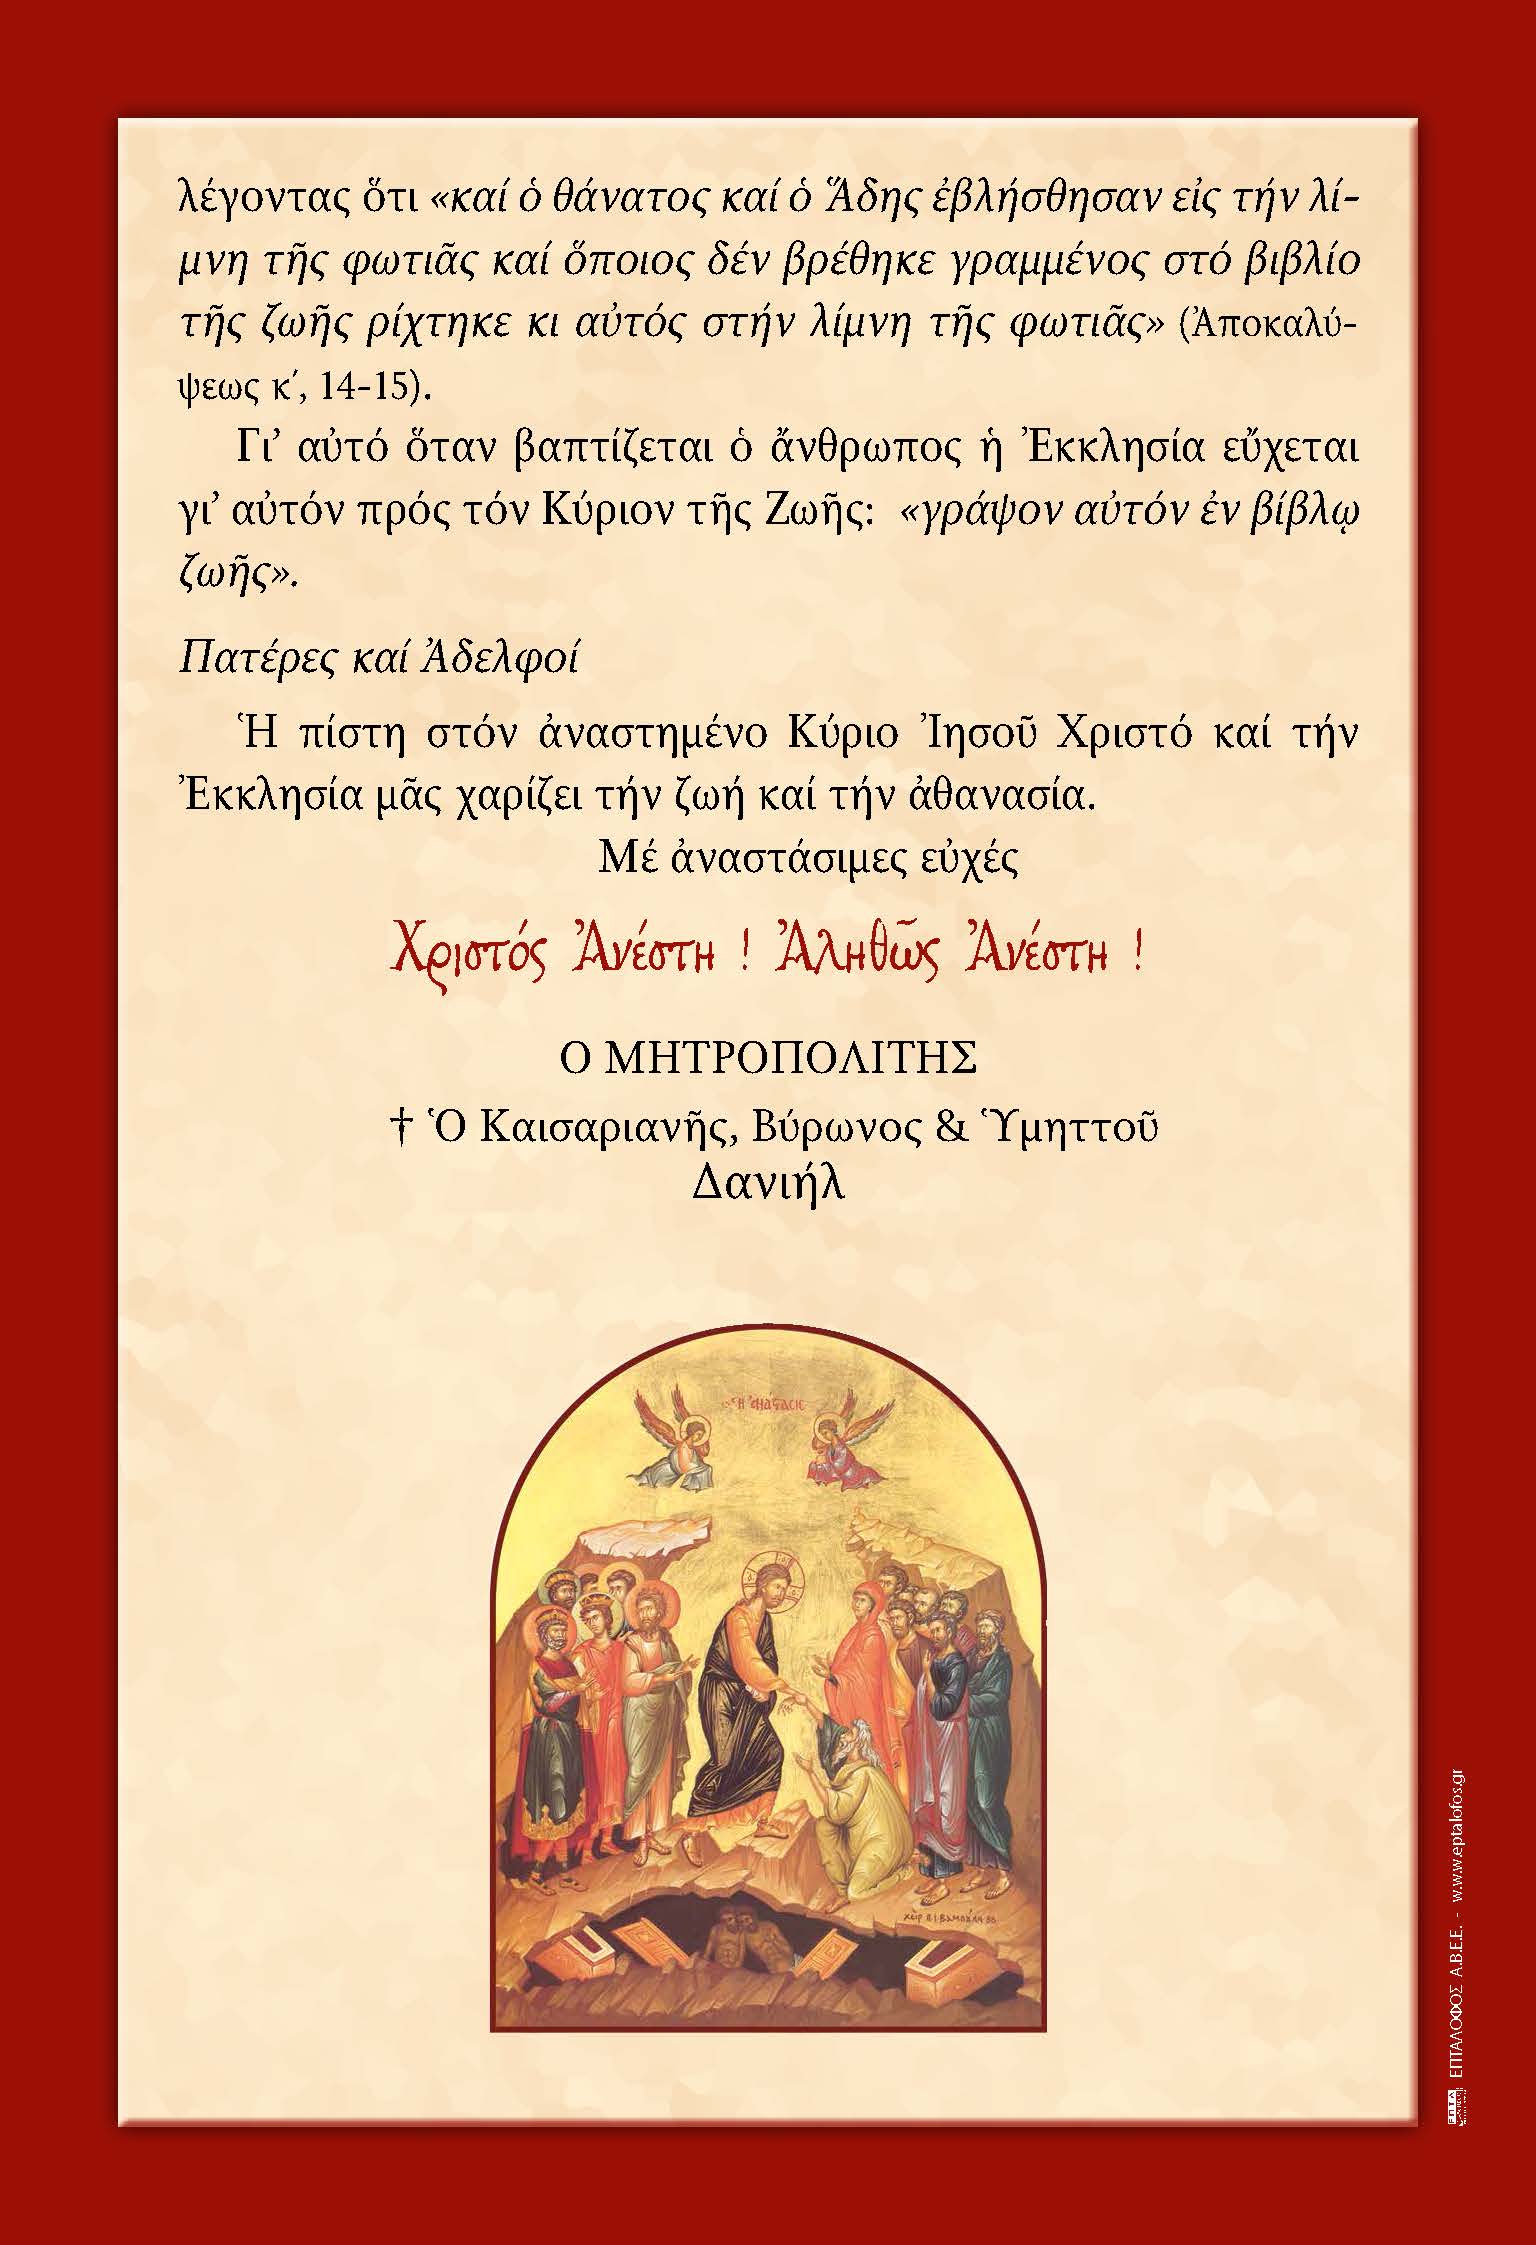 mes EASTER 2020 σελιδες Page 4